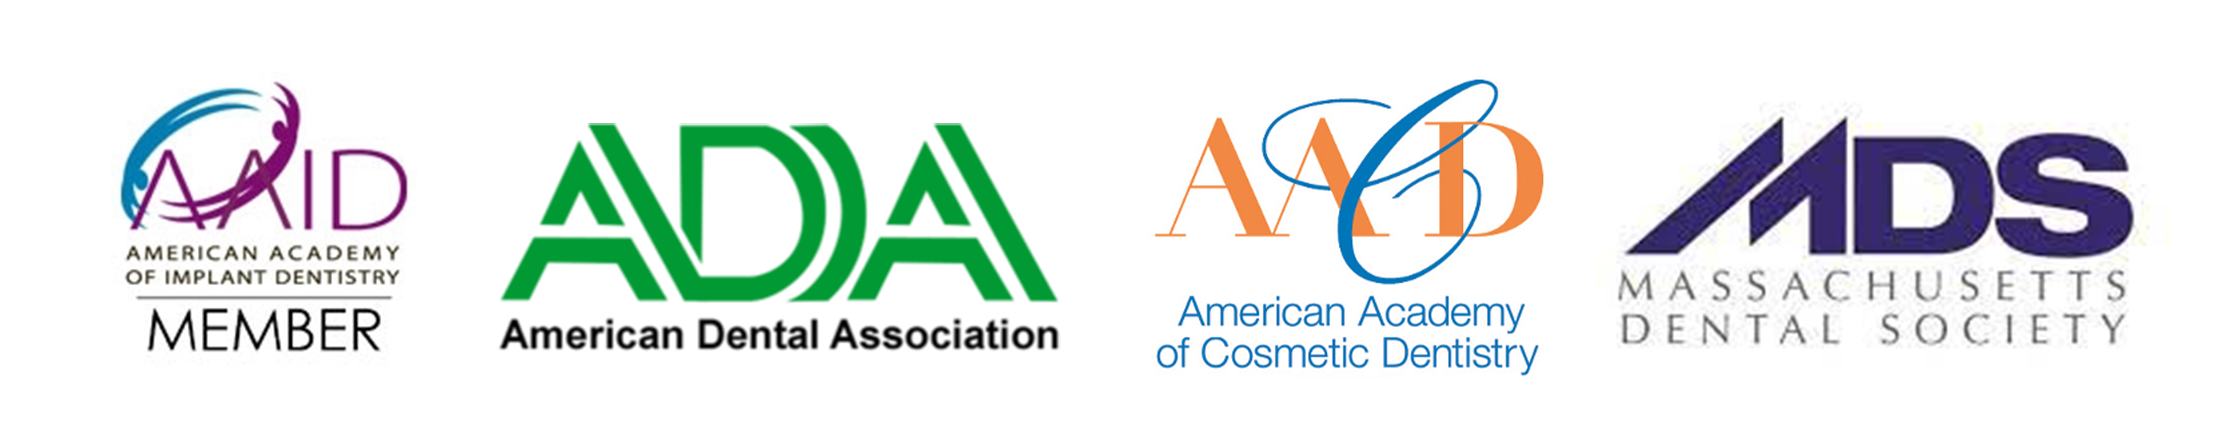 Dr. Sheng's memberships with the American Association of Cosmetic Dentistry, Academy of General Dentistry, American Dental Association, and the Massachusetts Dental Society